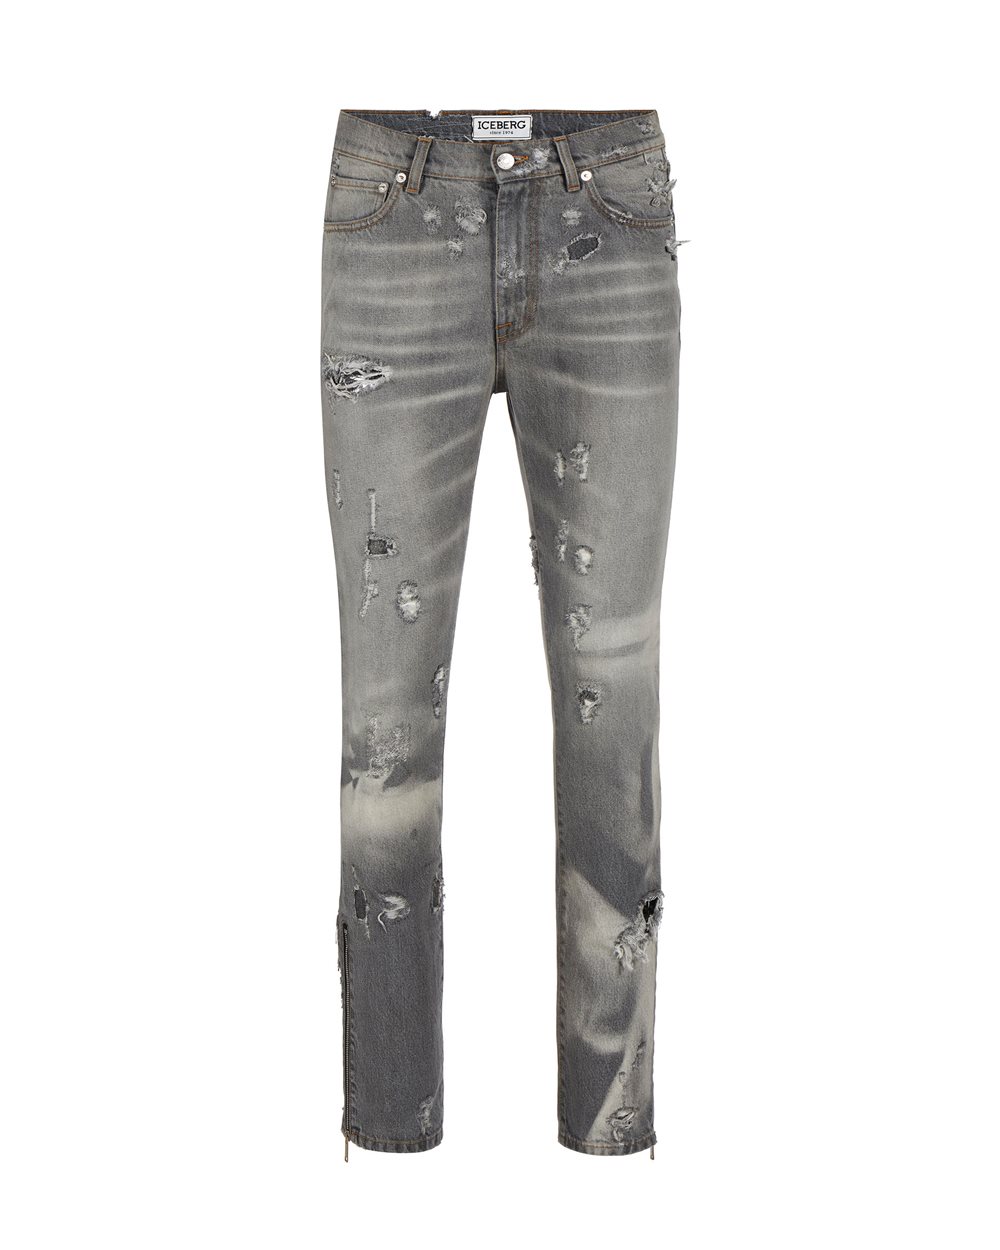 Gray washed jeans 5 pockets | Iceberg - Official Website